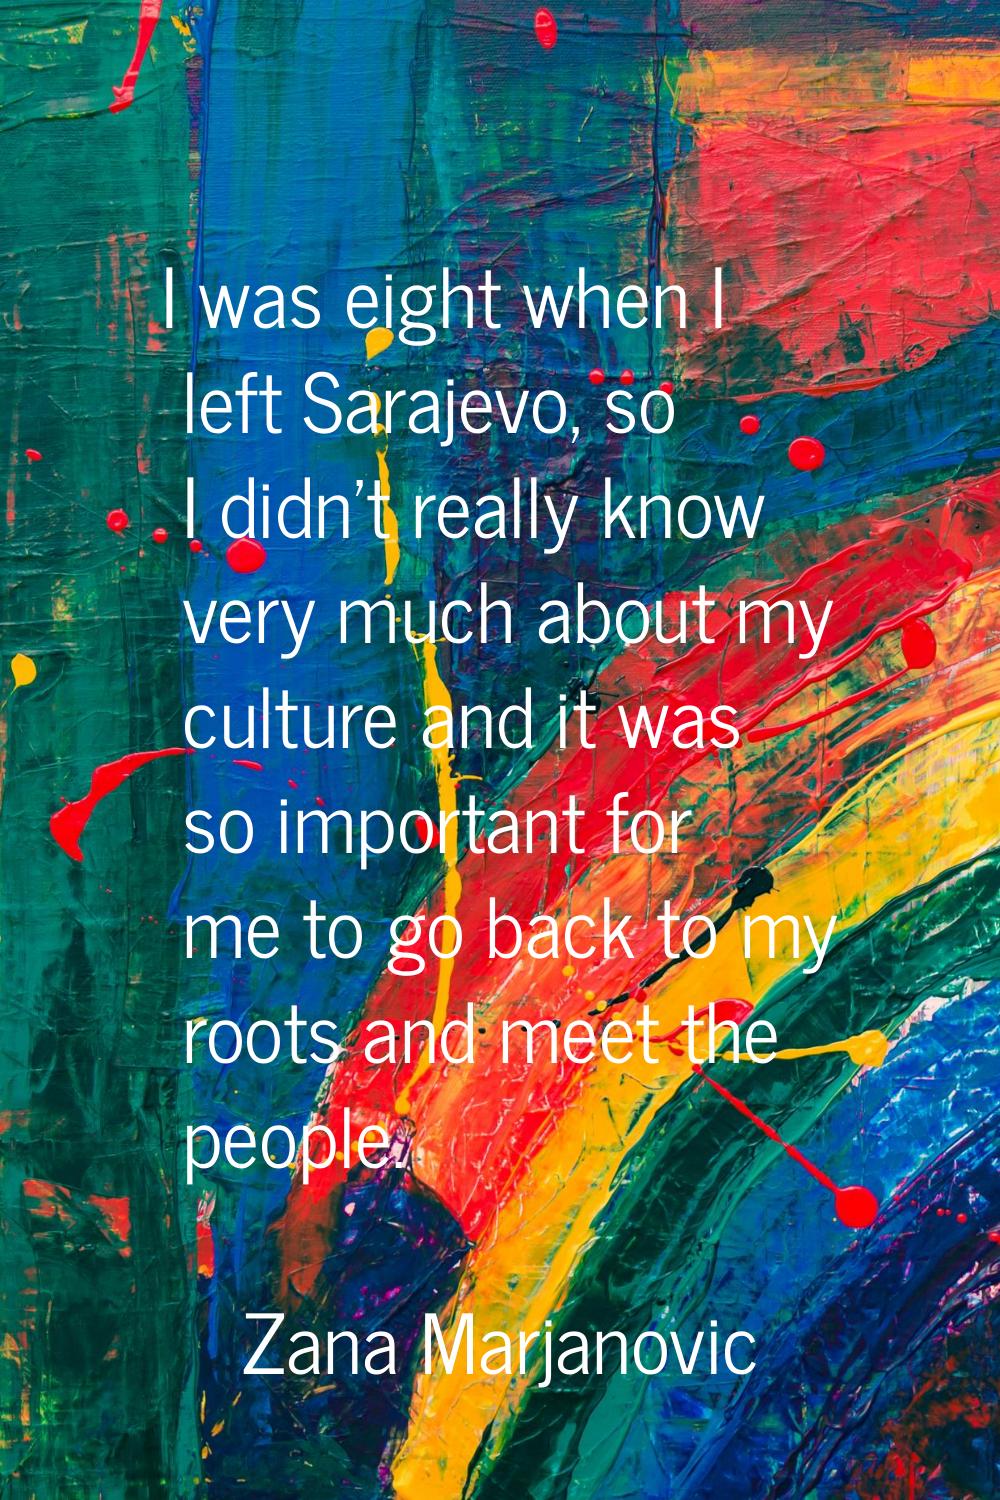 I was eight when I left Sarajevo, so I didn't really know very much about my culture and it was so 